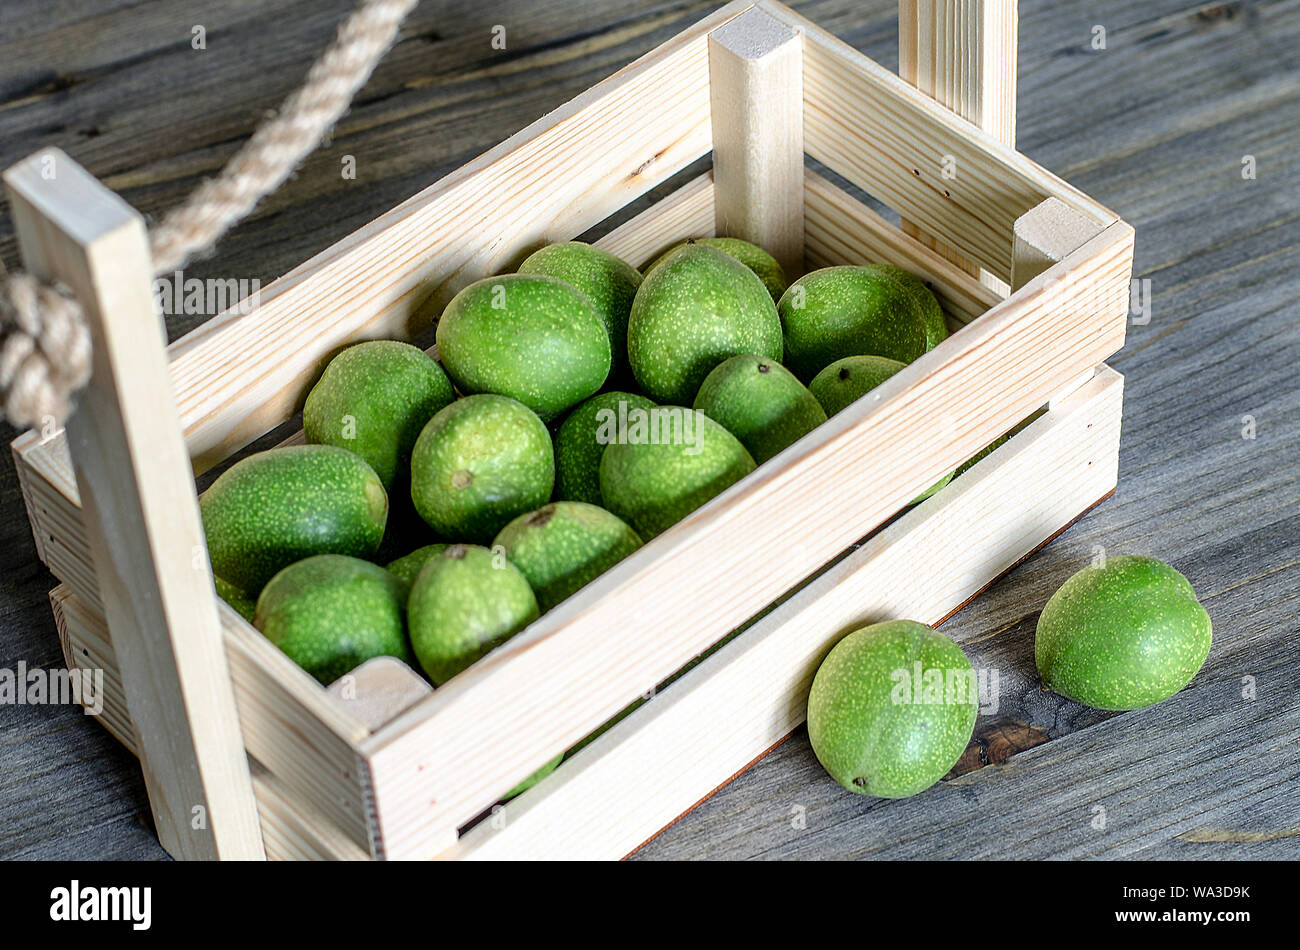 Young green fruits of walnuts in a green shell in a wooden box. Stock Photo